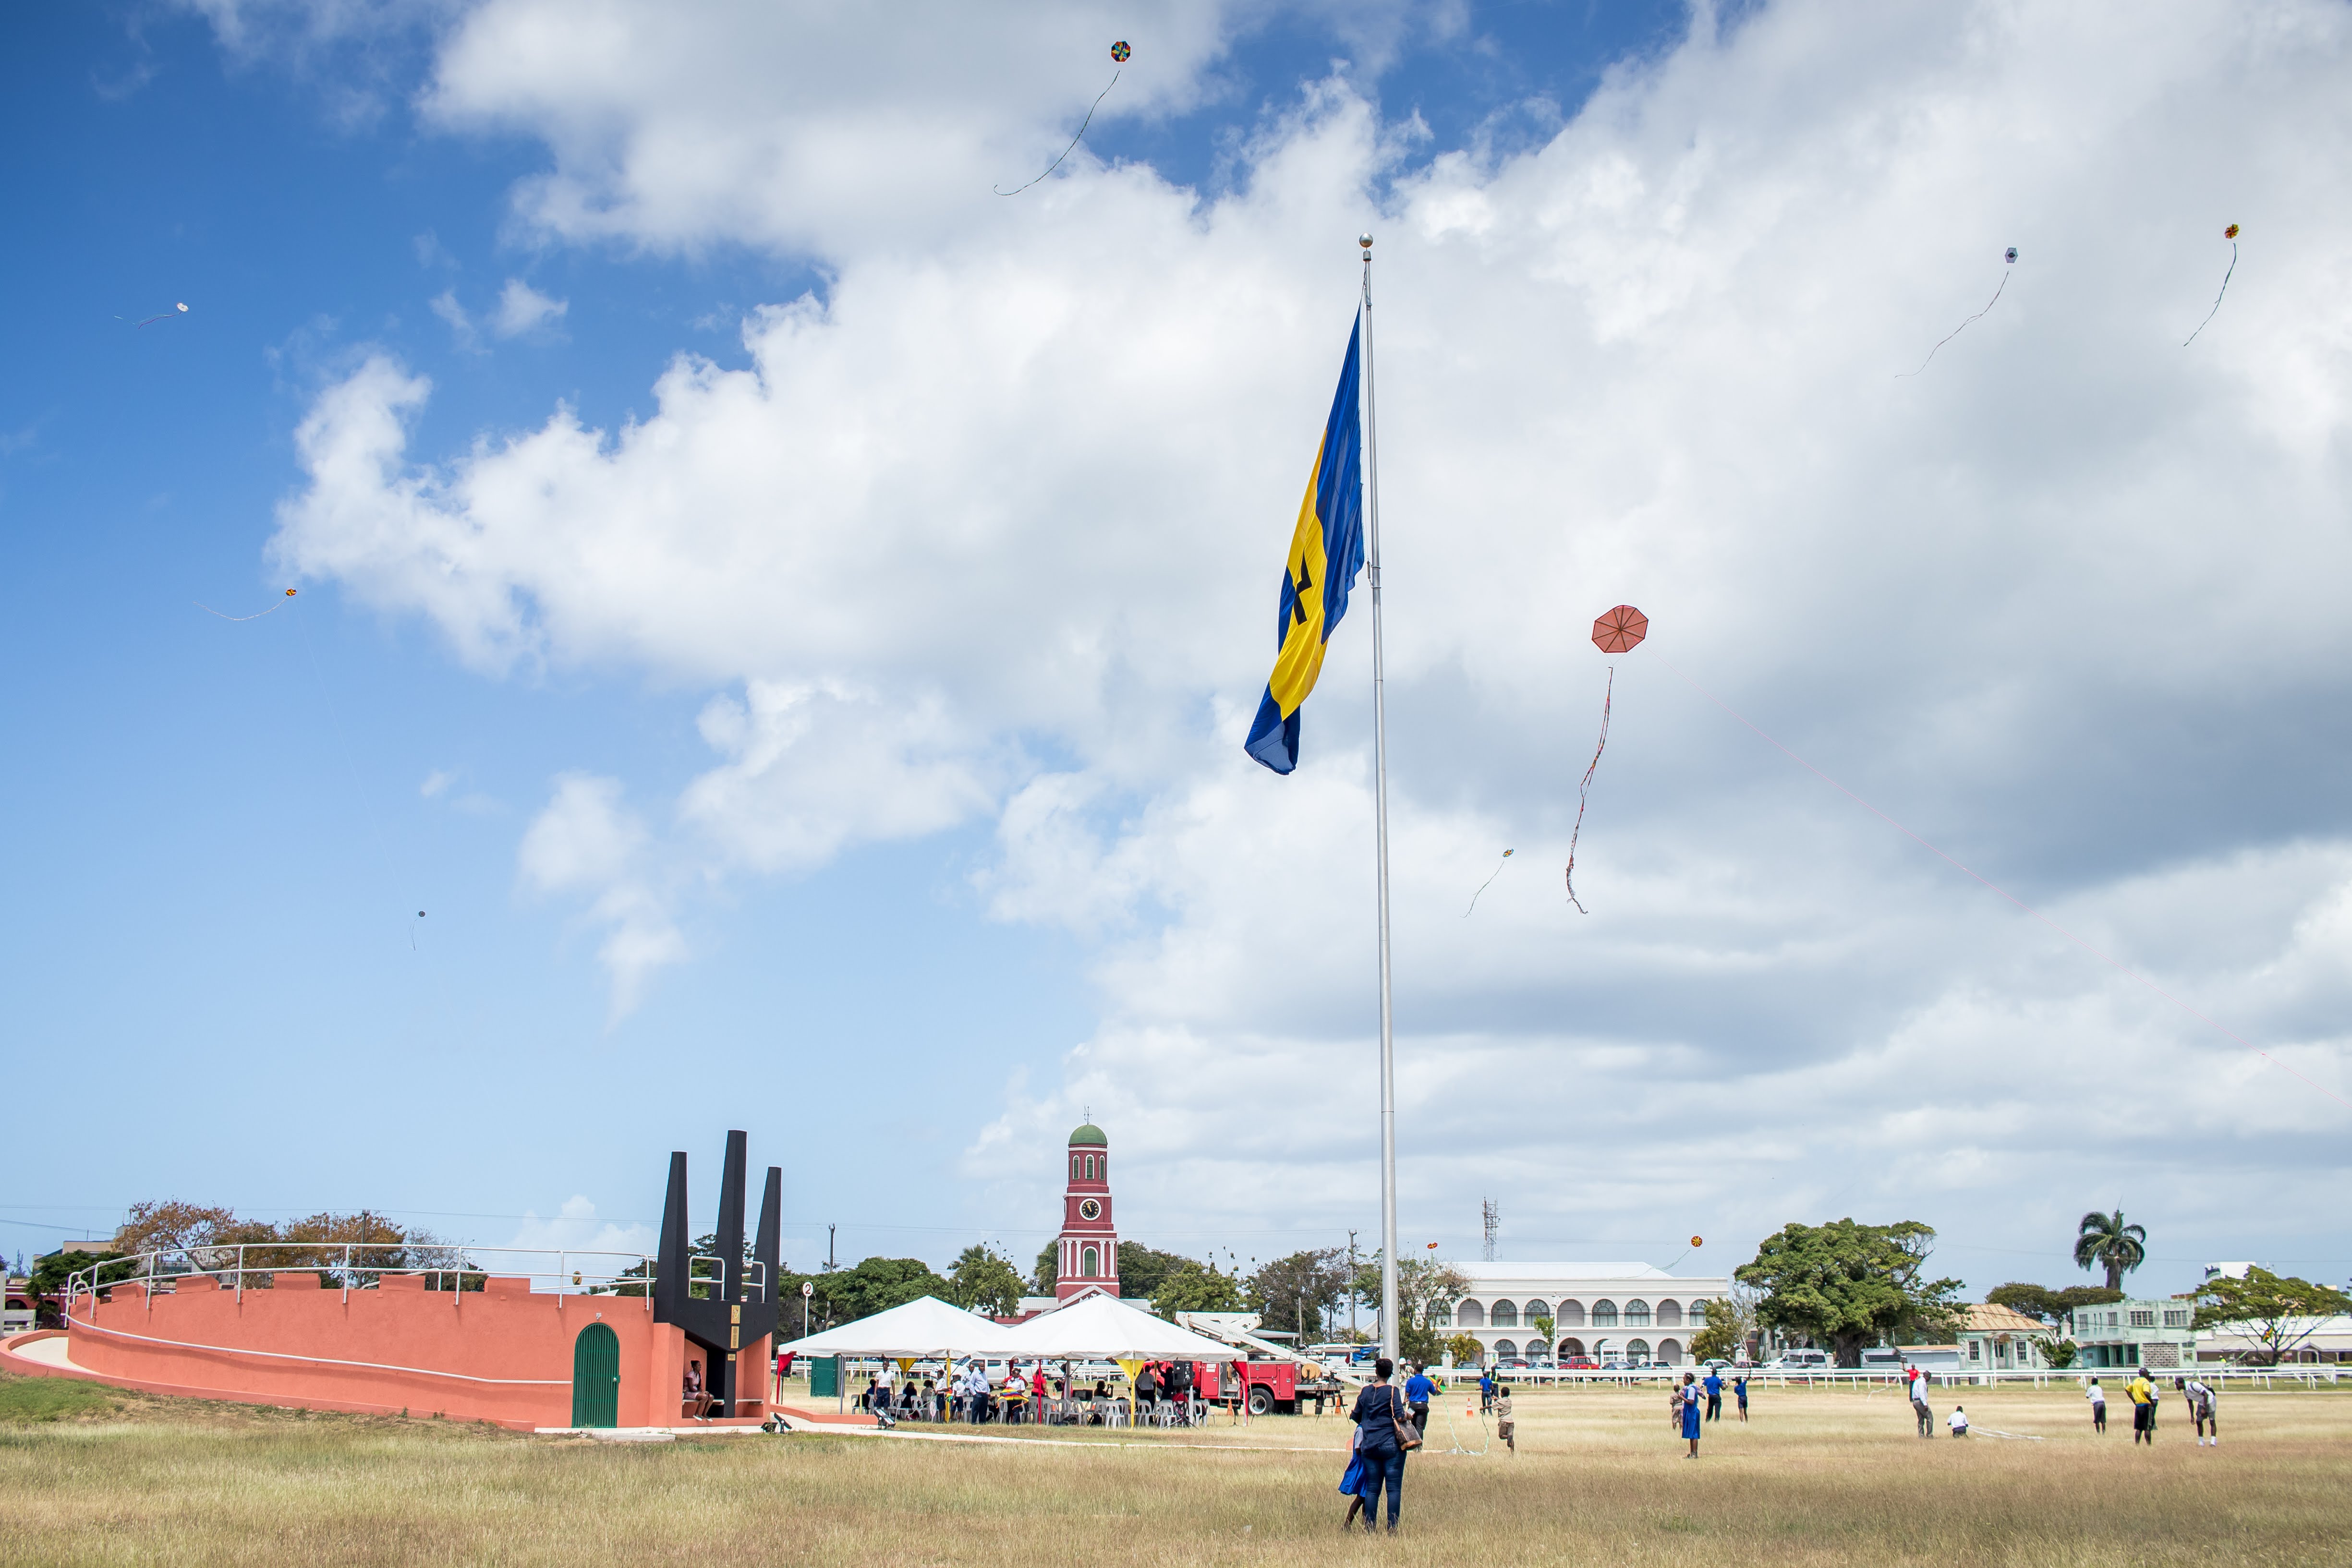 Staying Safe when Flying Kites 